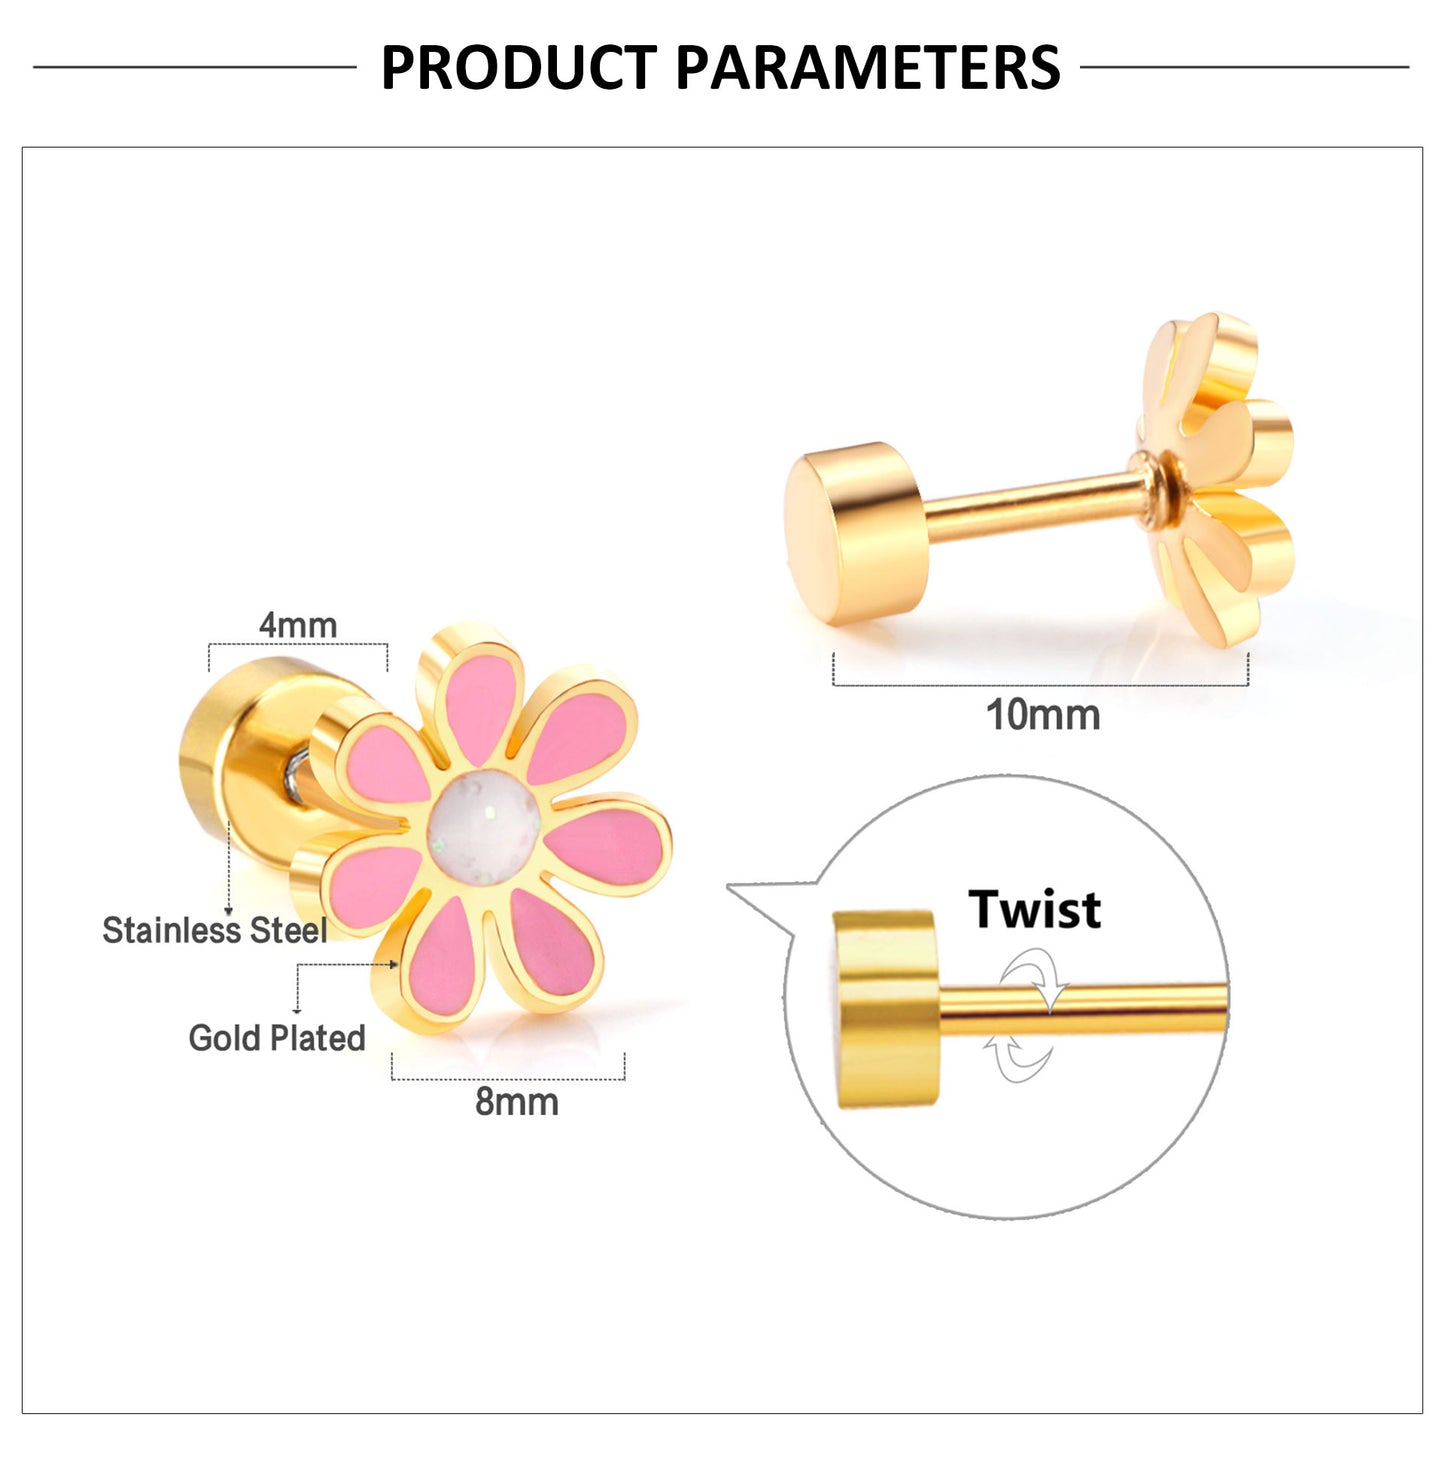 Children's Earrings:  Surgical Steel with Gold IP Pink/White Flowers with Screw Backs